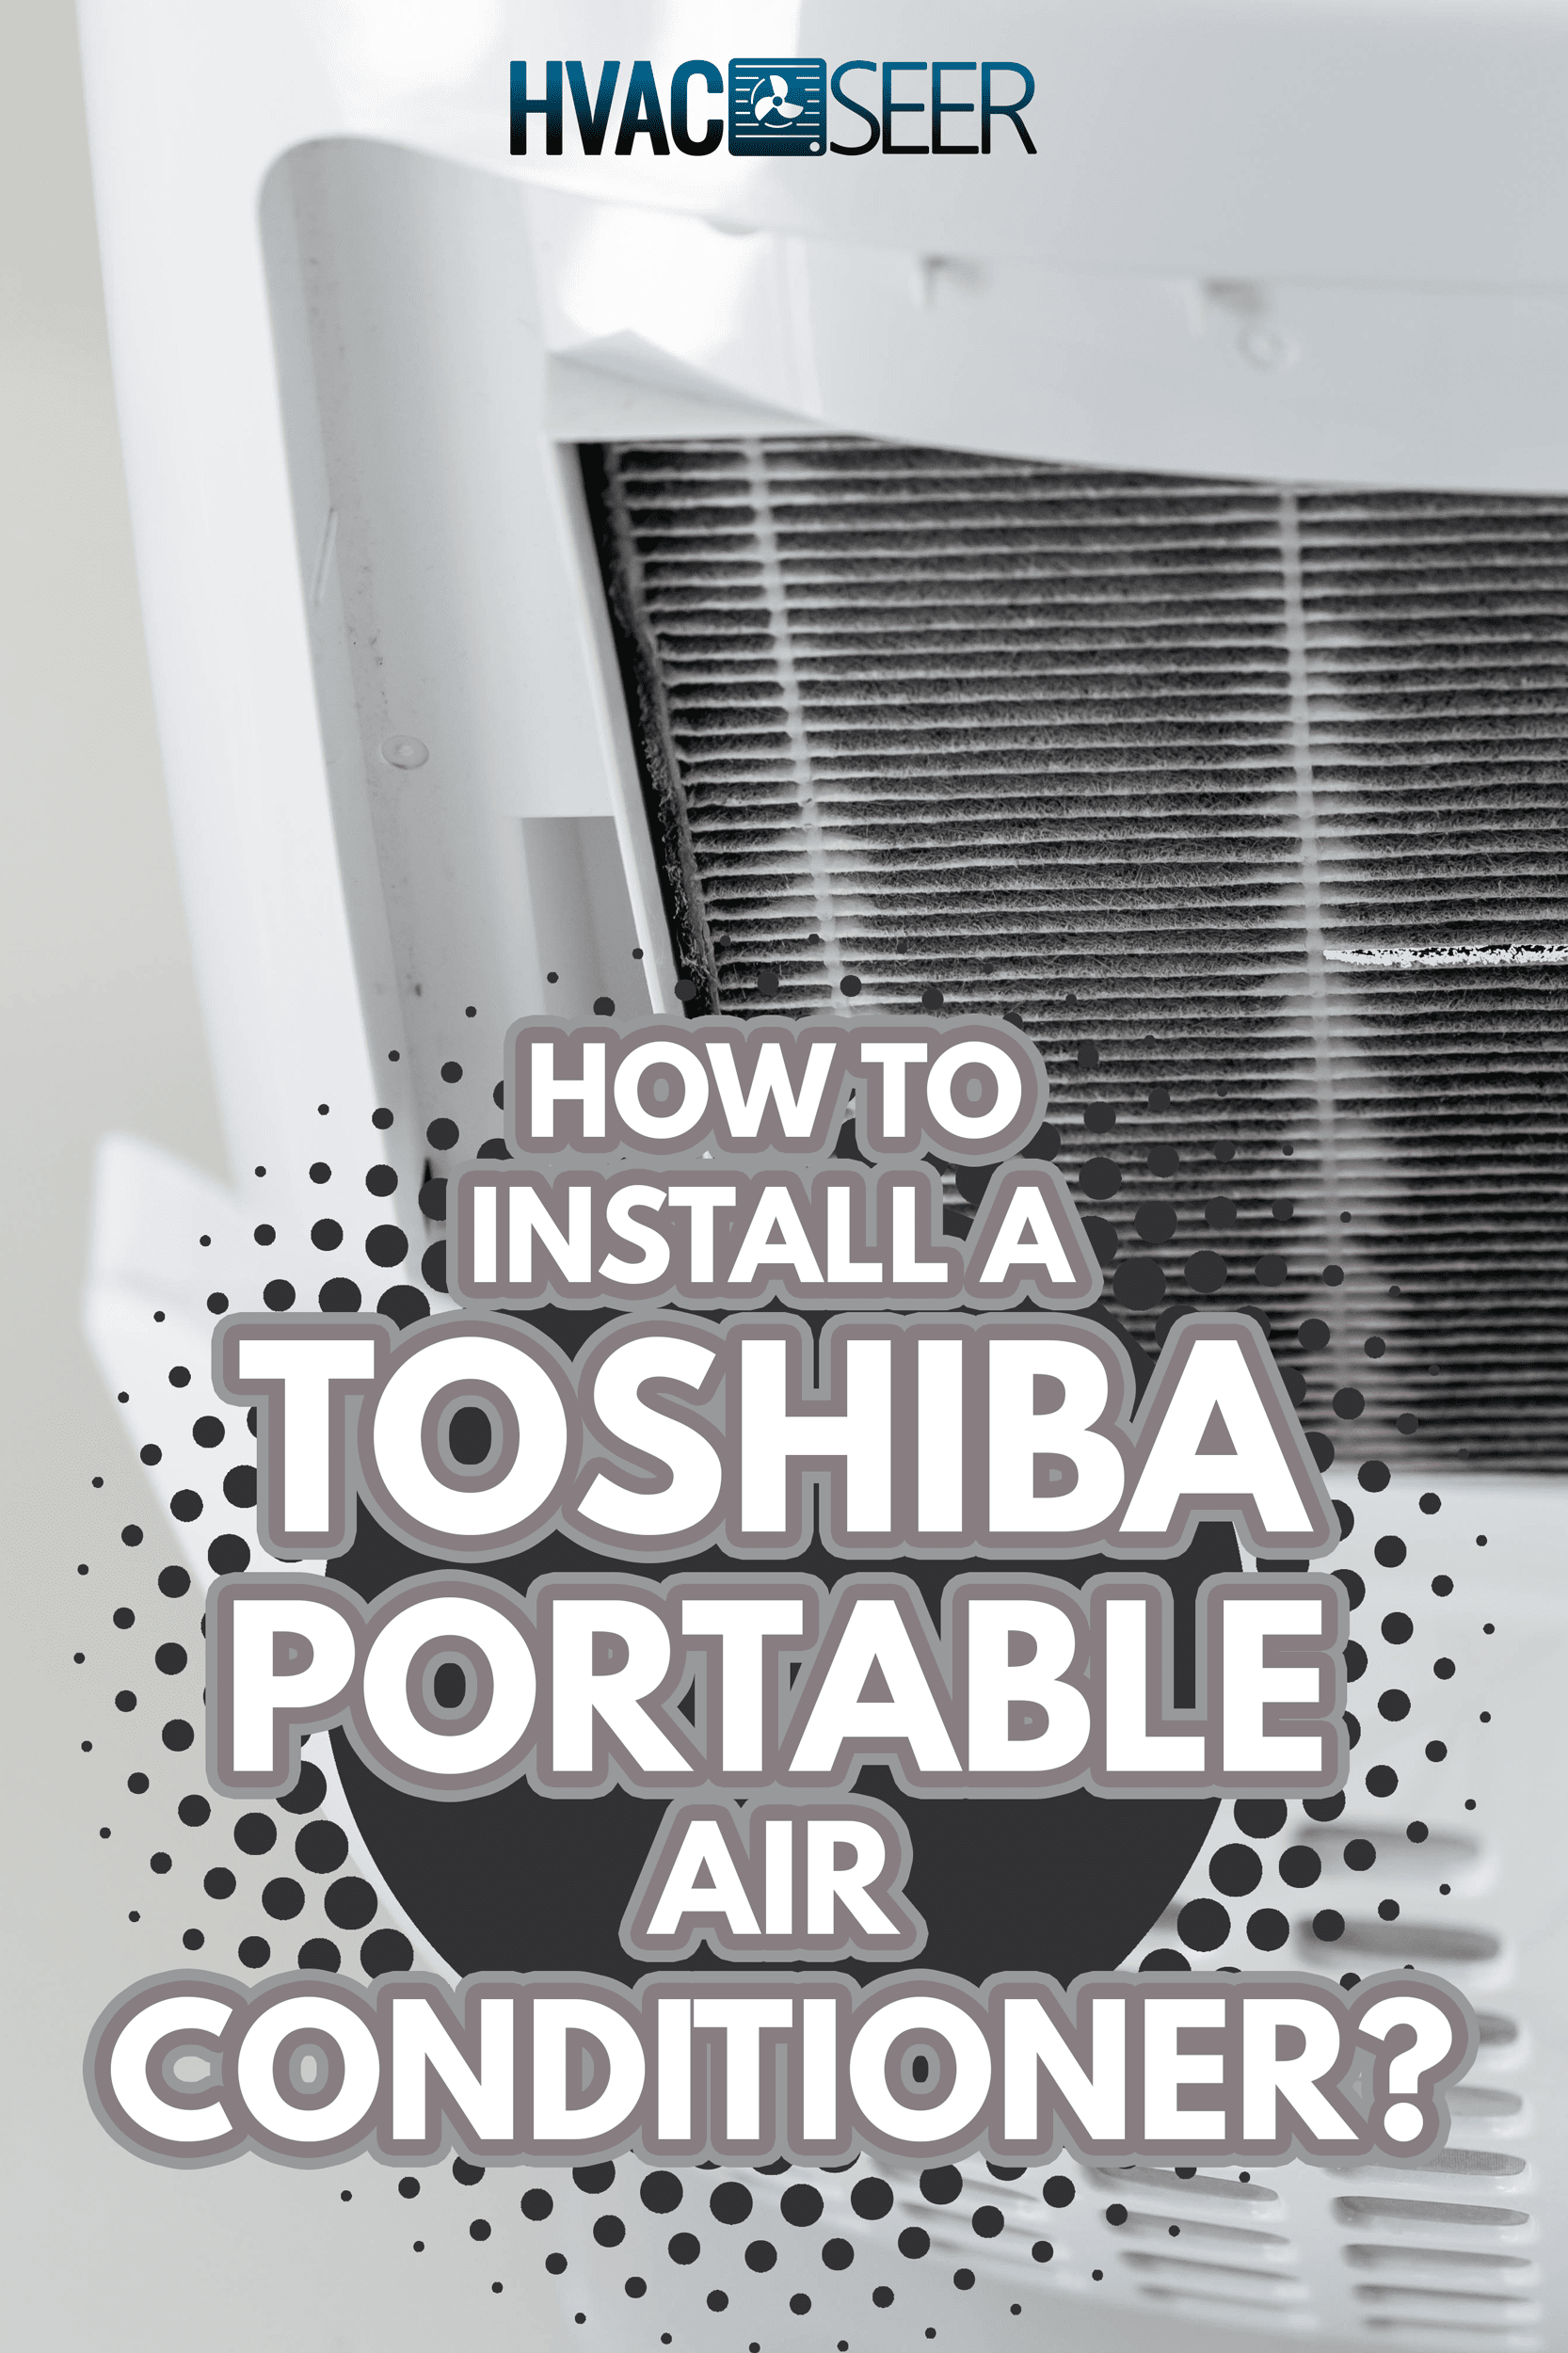 Focused on dirty filter - How To Install A Toshiba Portable Air 